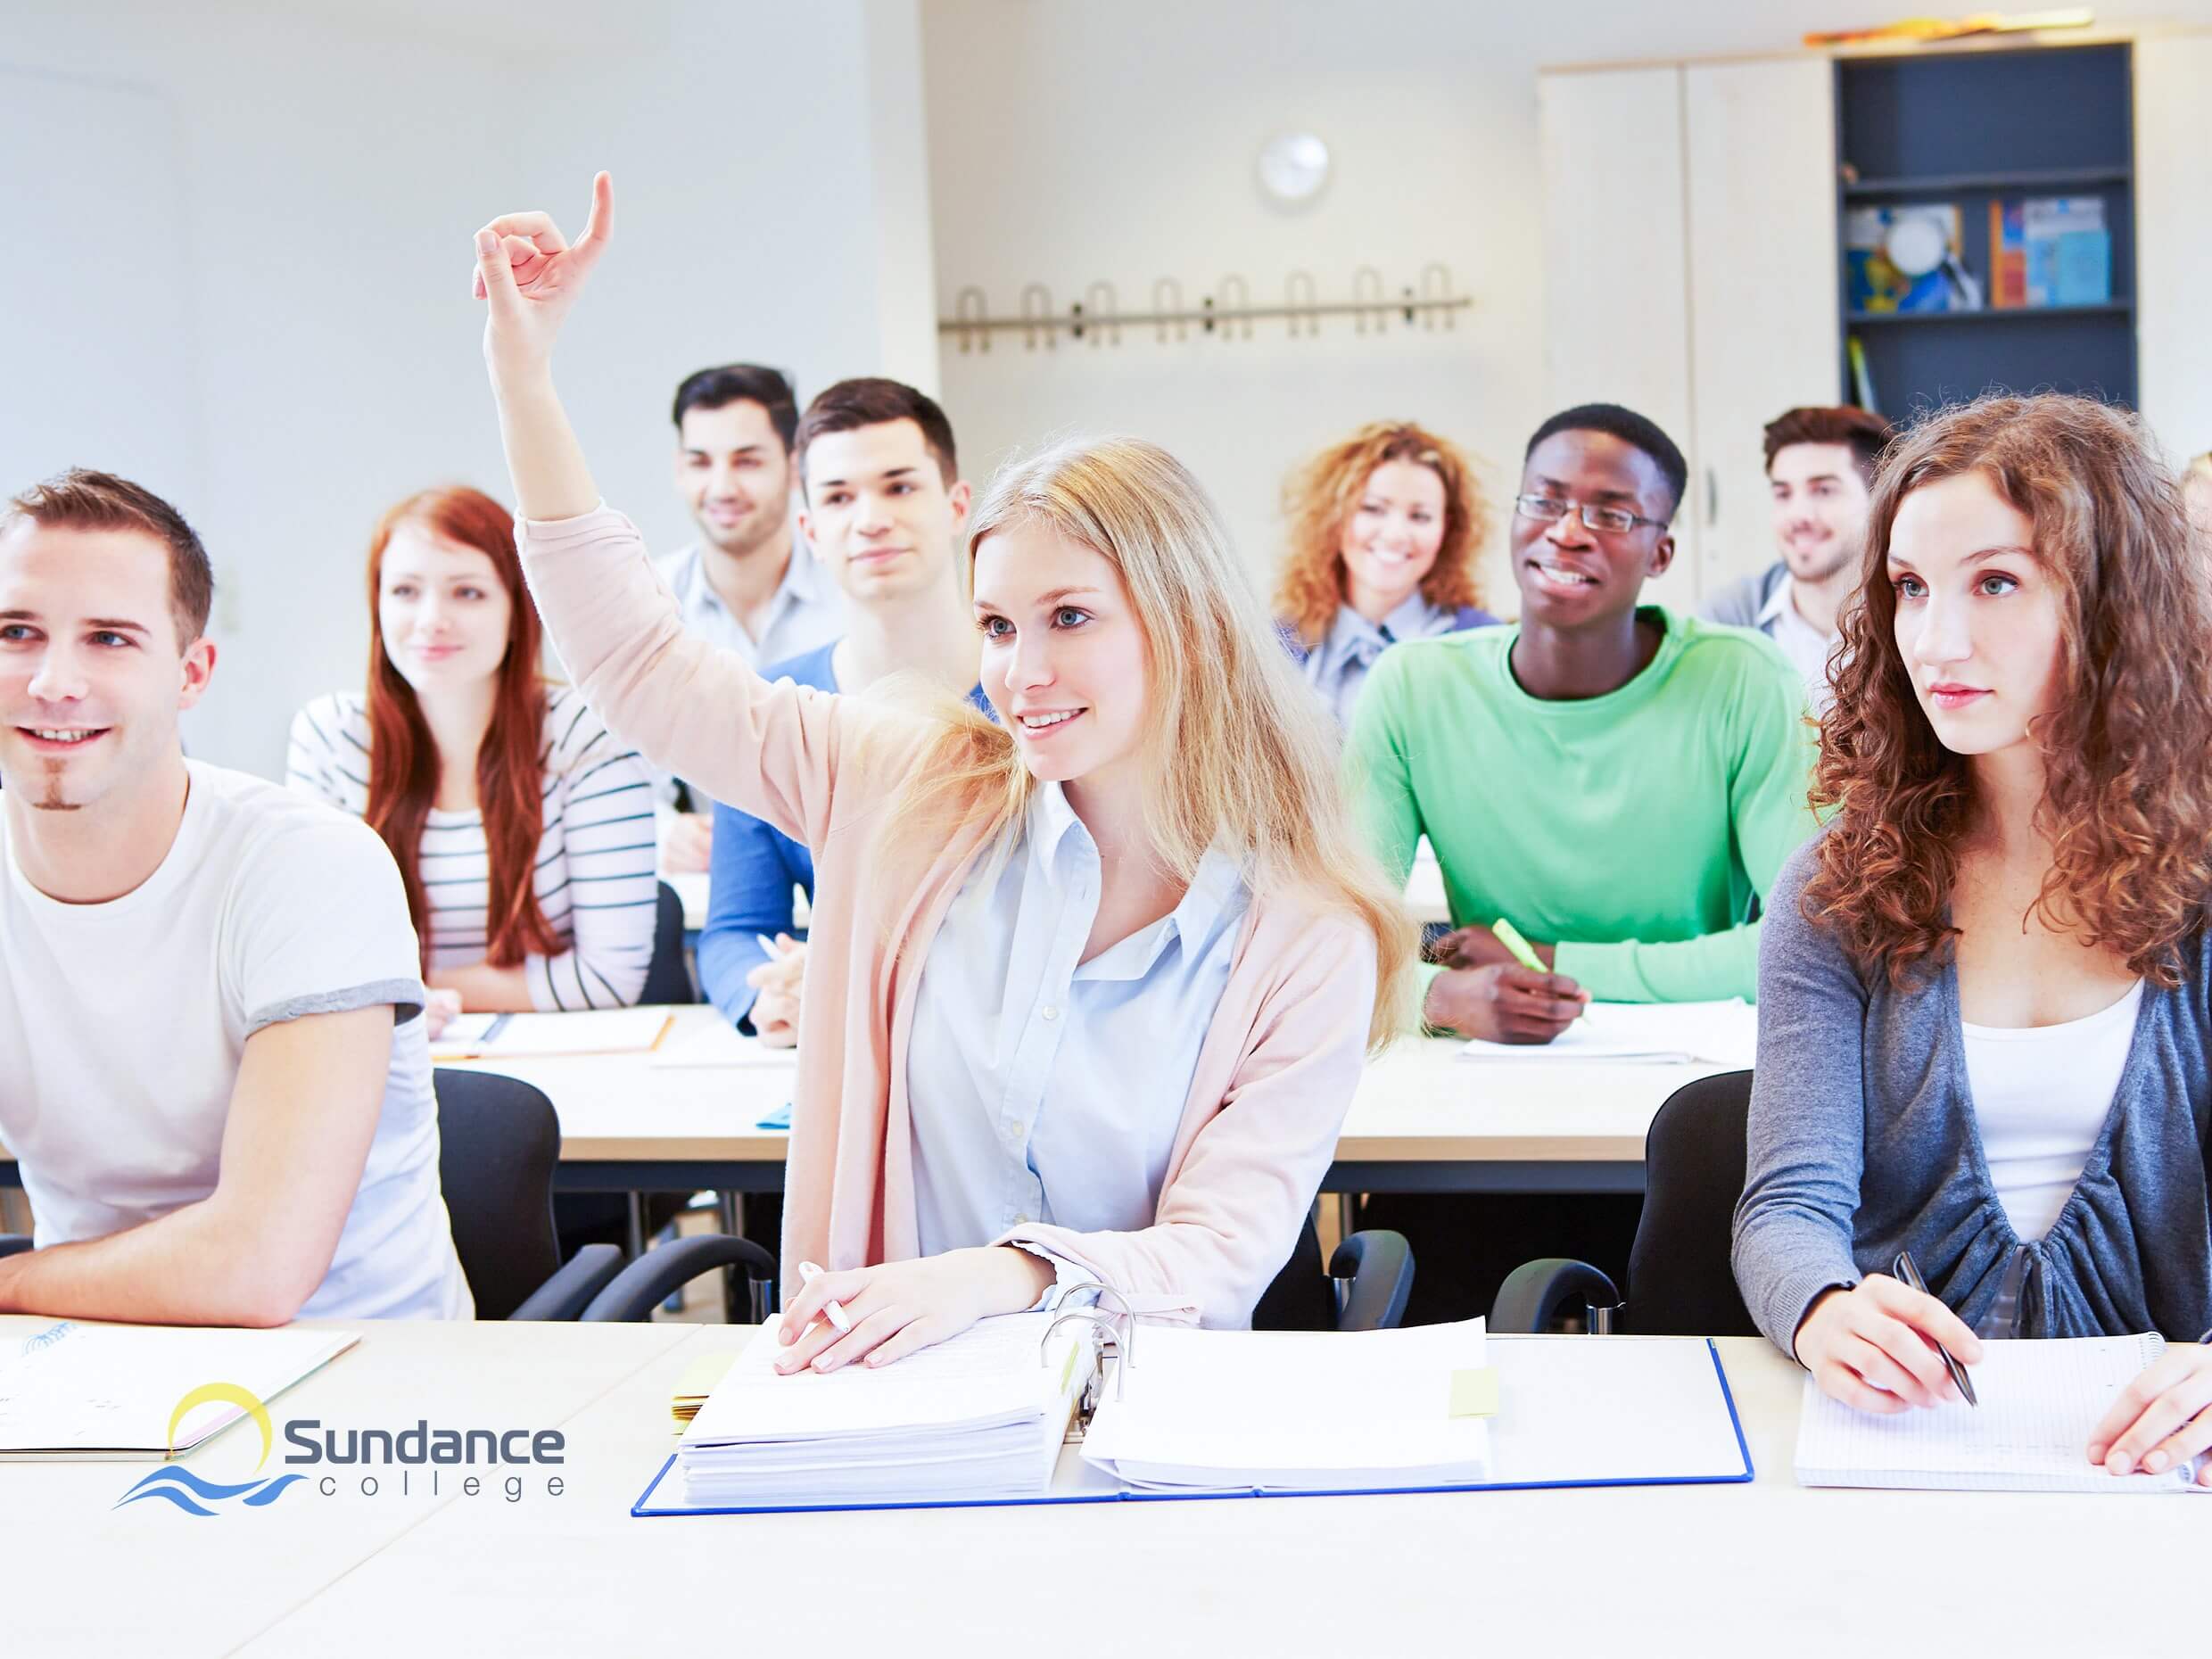 a diligent female business student raising hand to answer question in business courses.